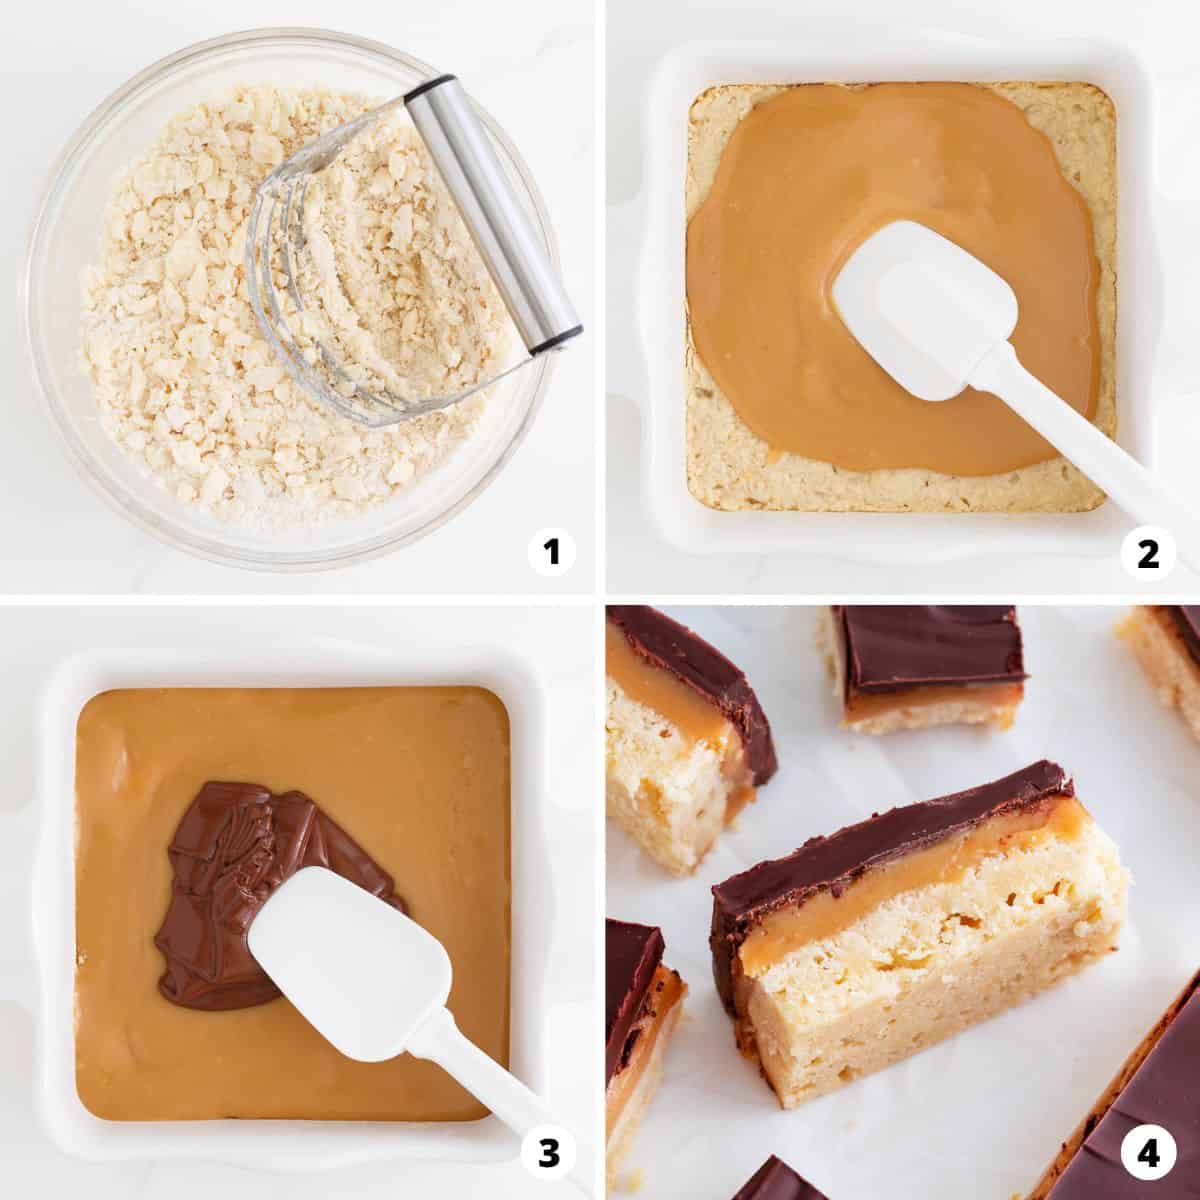 Showing how to make twix bars in a 4 step collage.